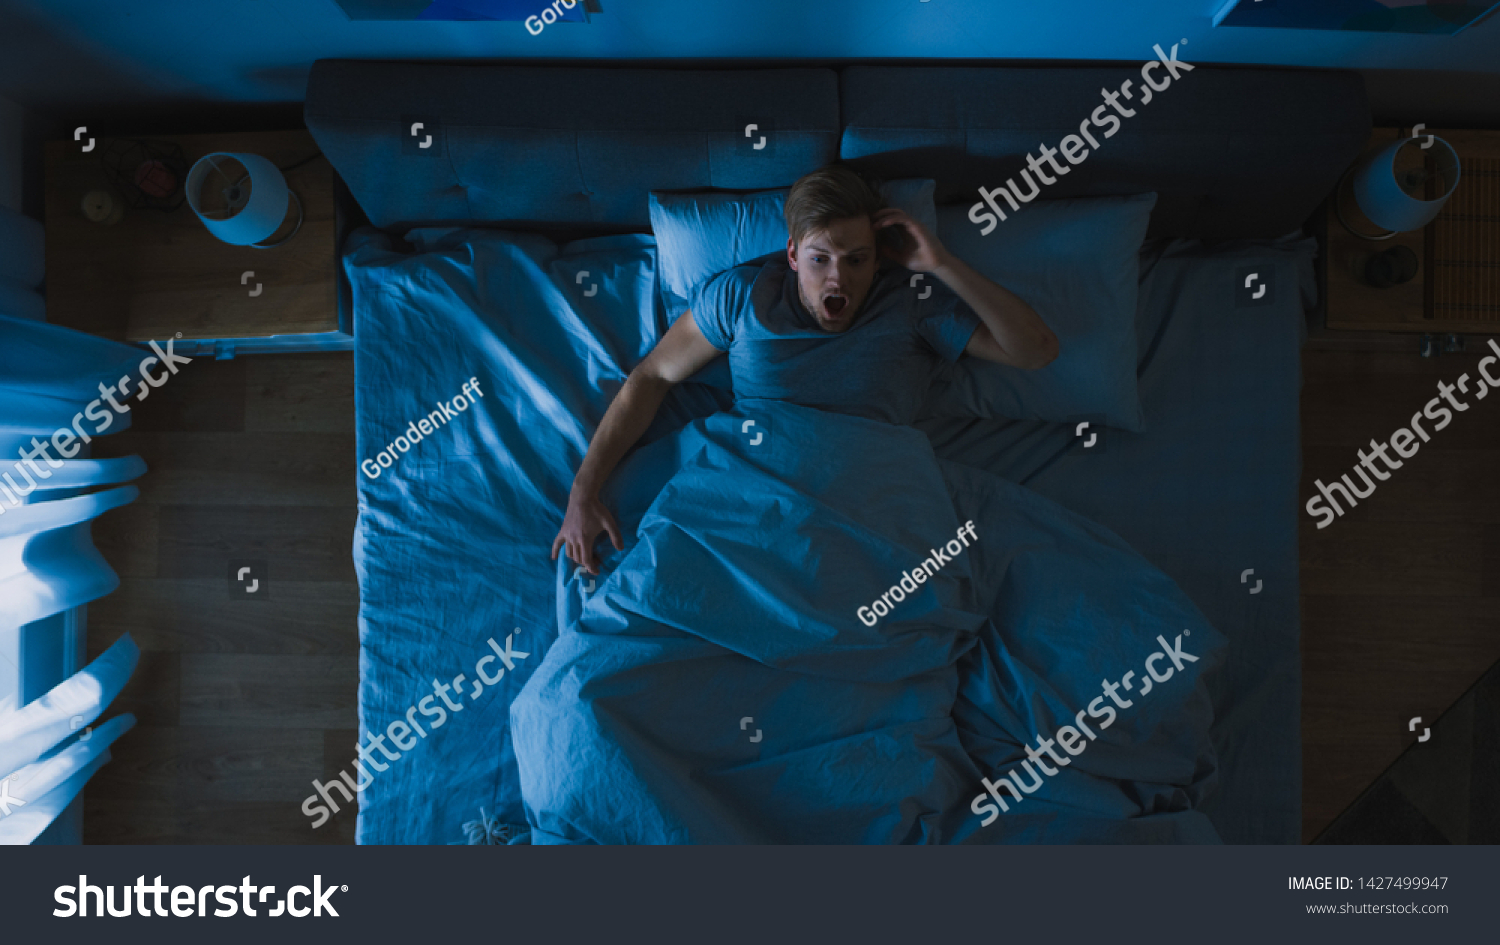 Up-frightened Images, Stock Photos & Vectors | Shutterstock